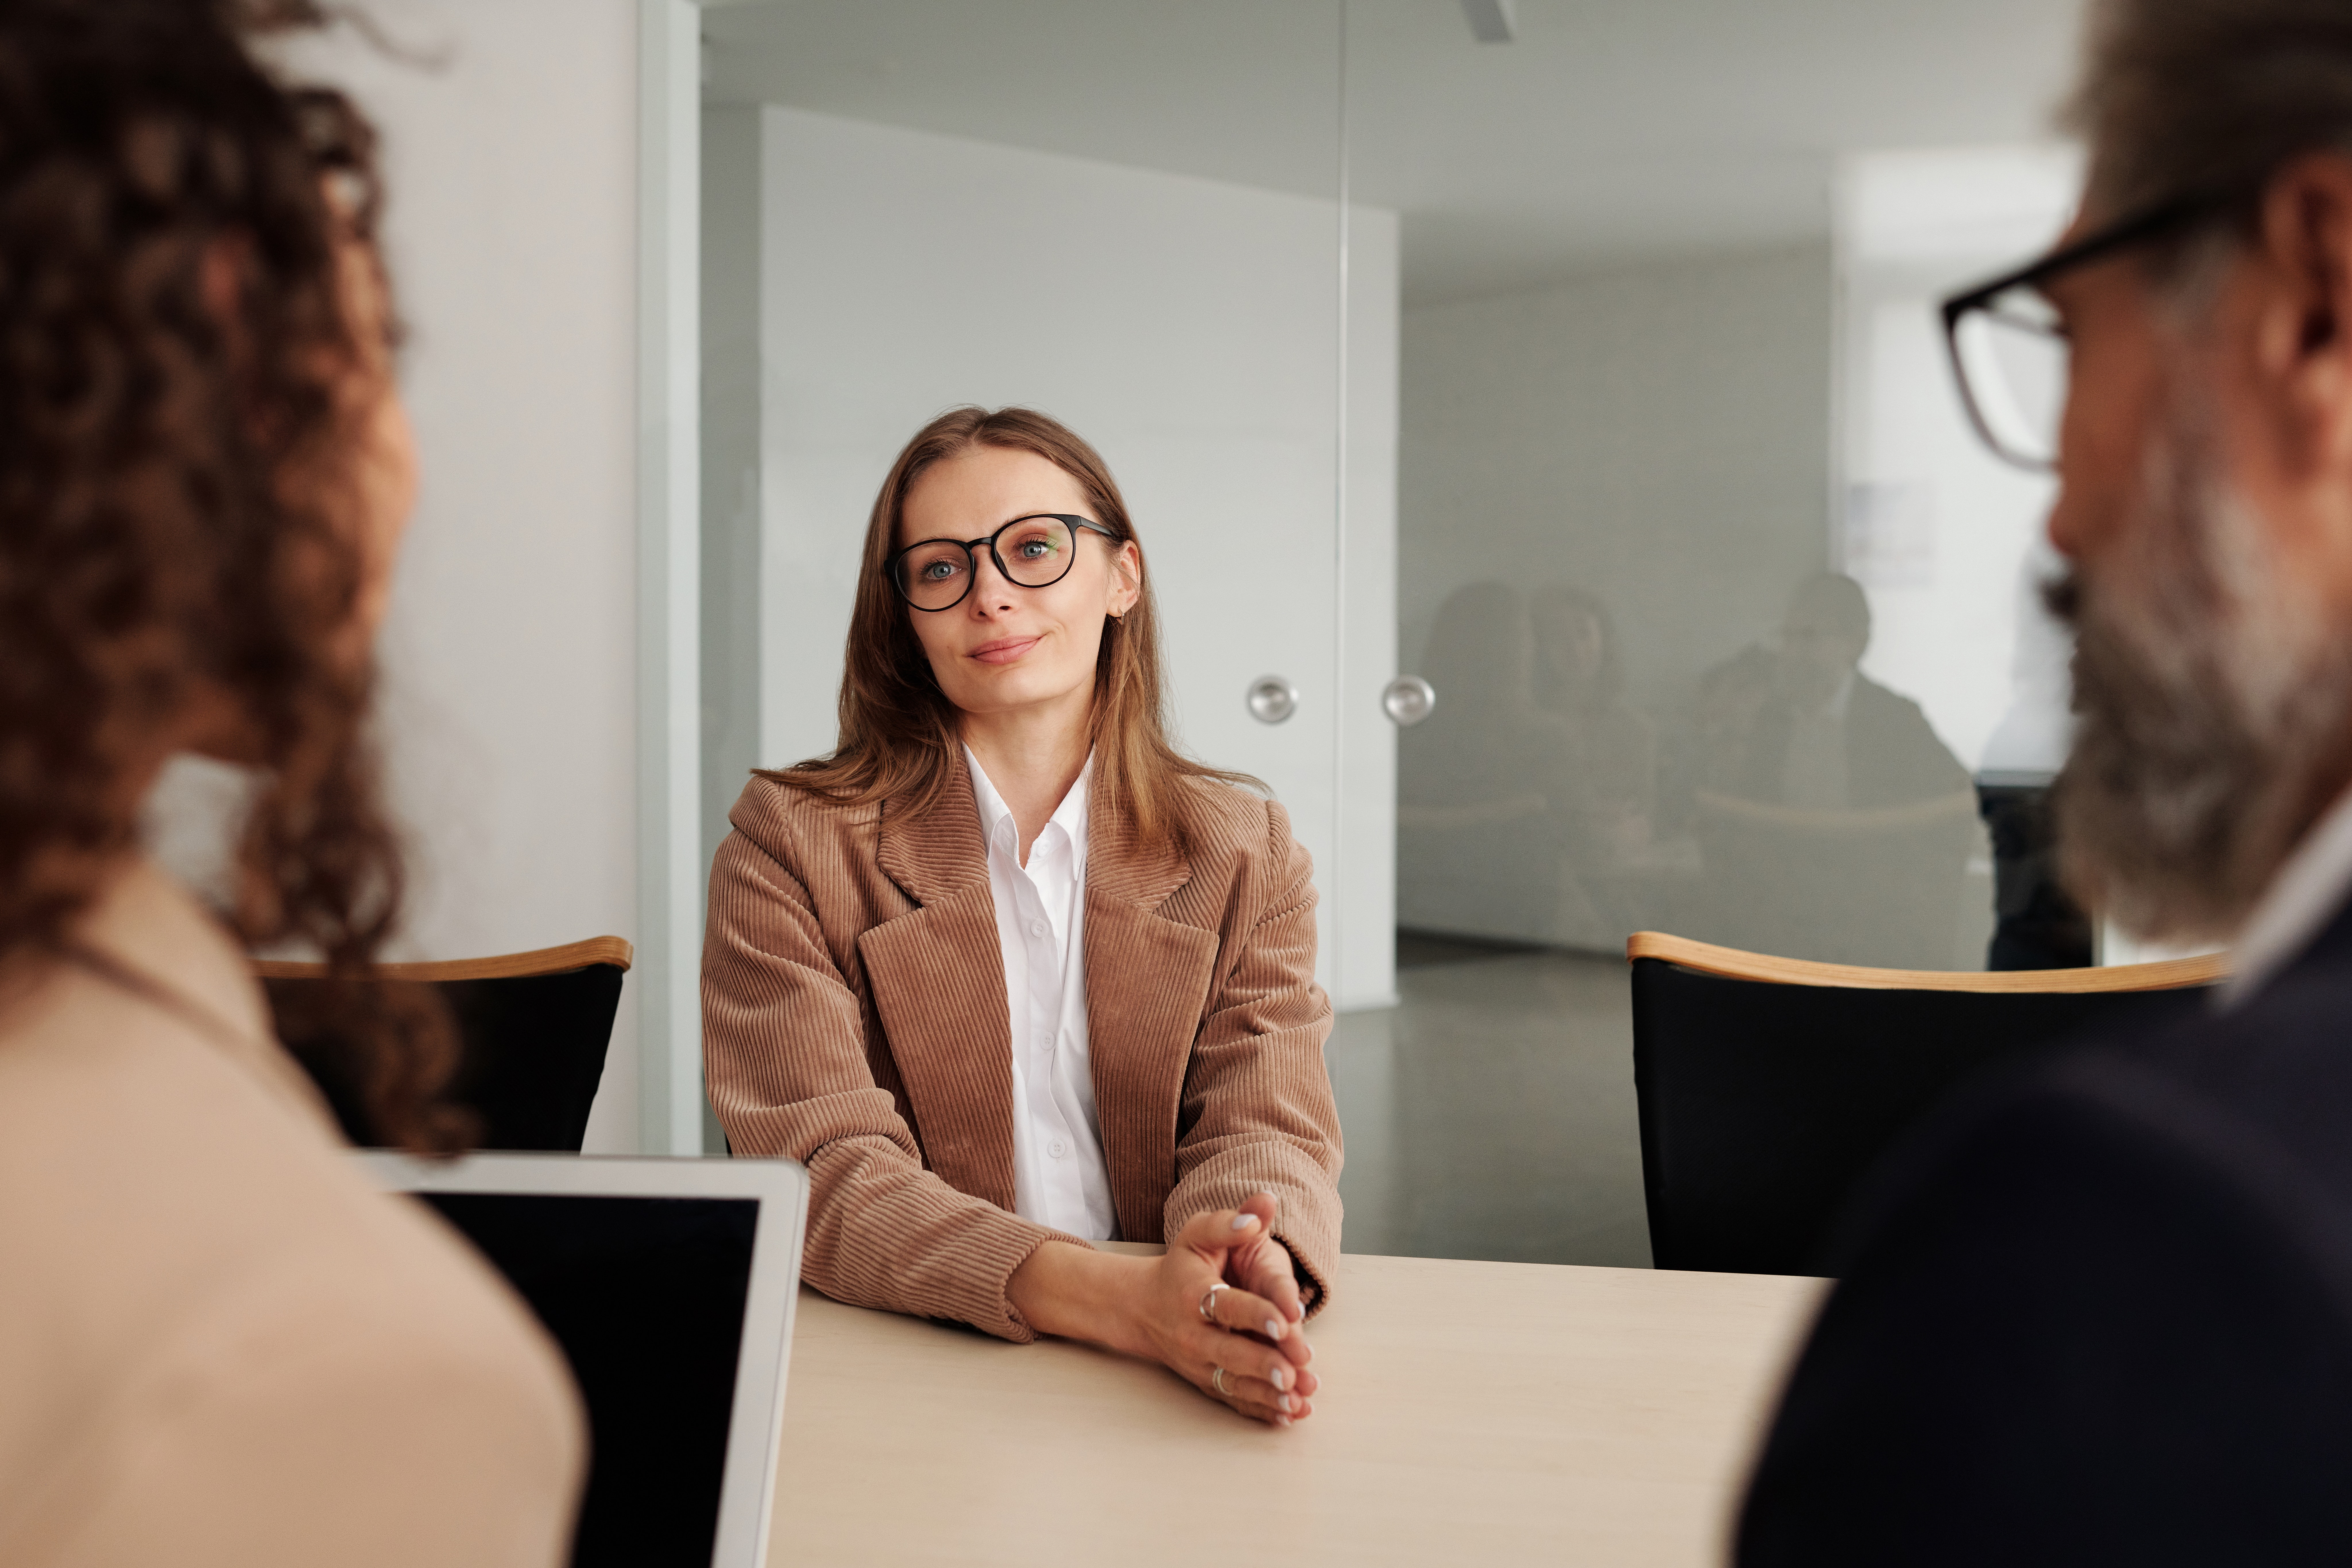 A picture of a women interviewing for a job